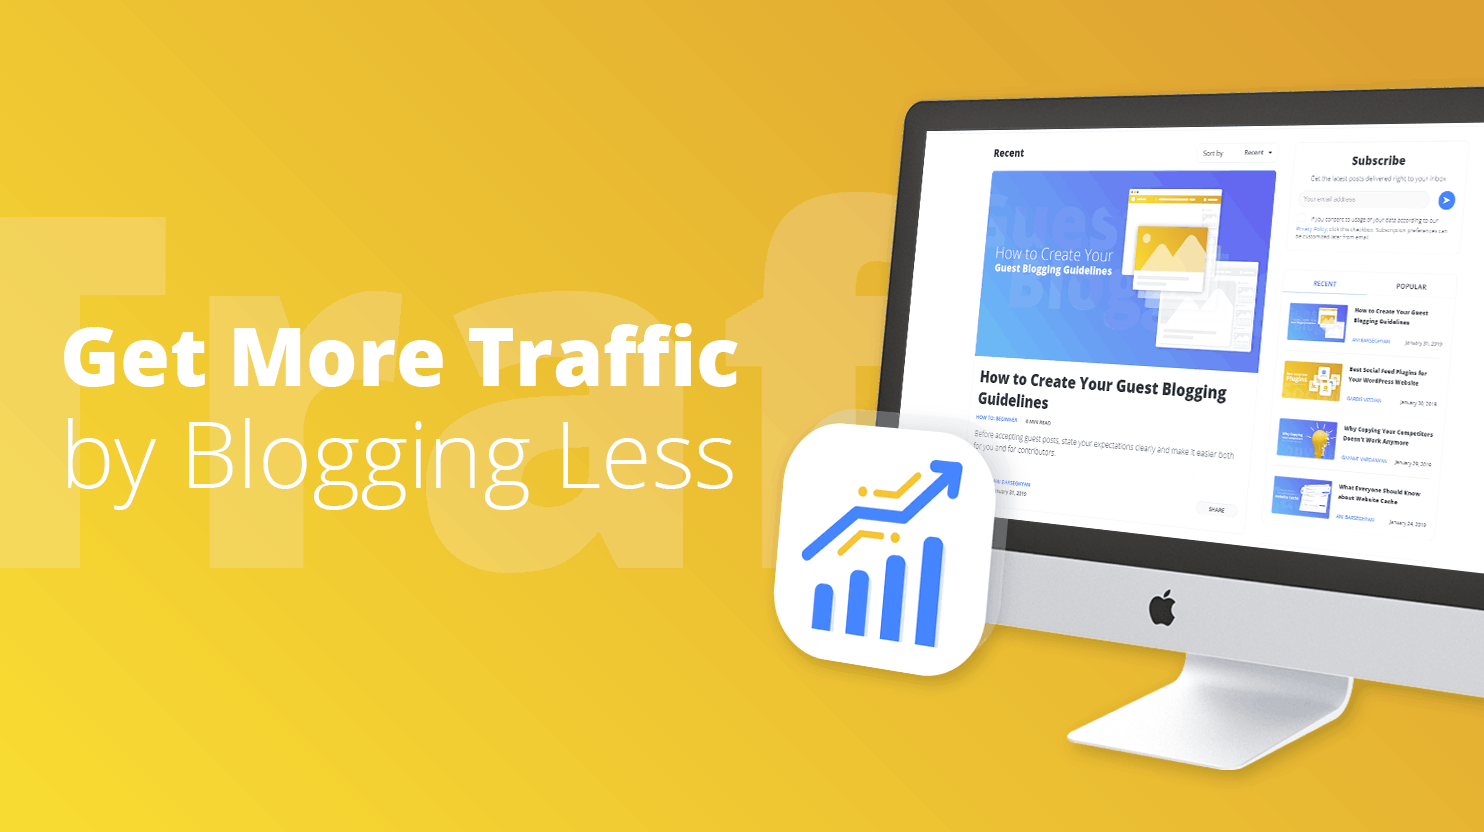 Get More Traffic by Blogging Less